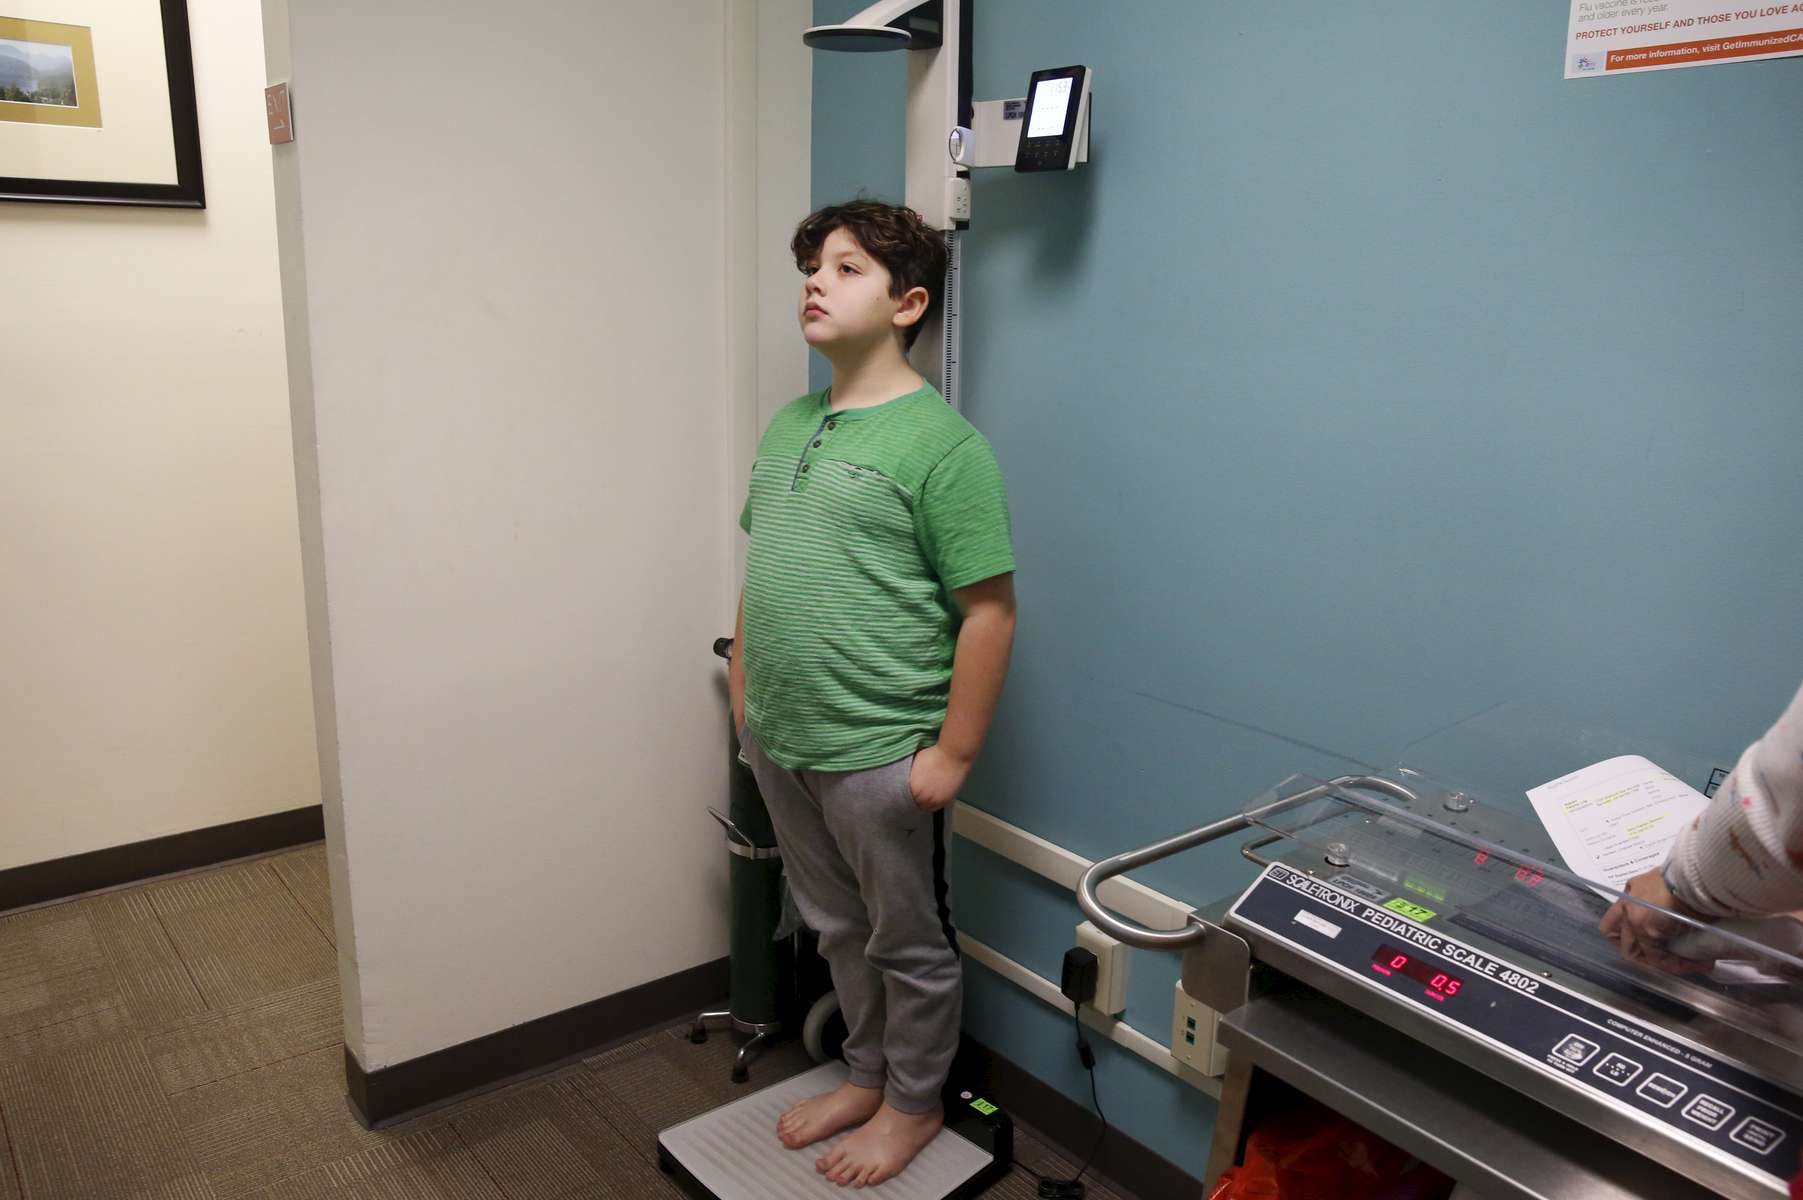 James Kaplan, 9, gets his height measured during an appointment with his pediatric doctor to check on his physical development Dec. 13, 2016 in Berkeley, Calif. Eventually,  James will be put on hormone blockers to stop the effects of puberty until he is a young teen. If he still insists on his current gender identity, he will then be put on cross-hormone therapy which will allow him to experience development that aligns with his gender identity. 